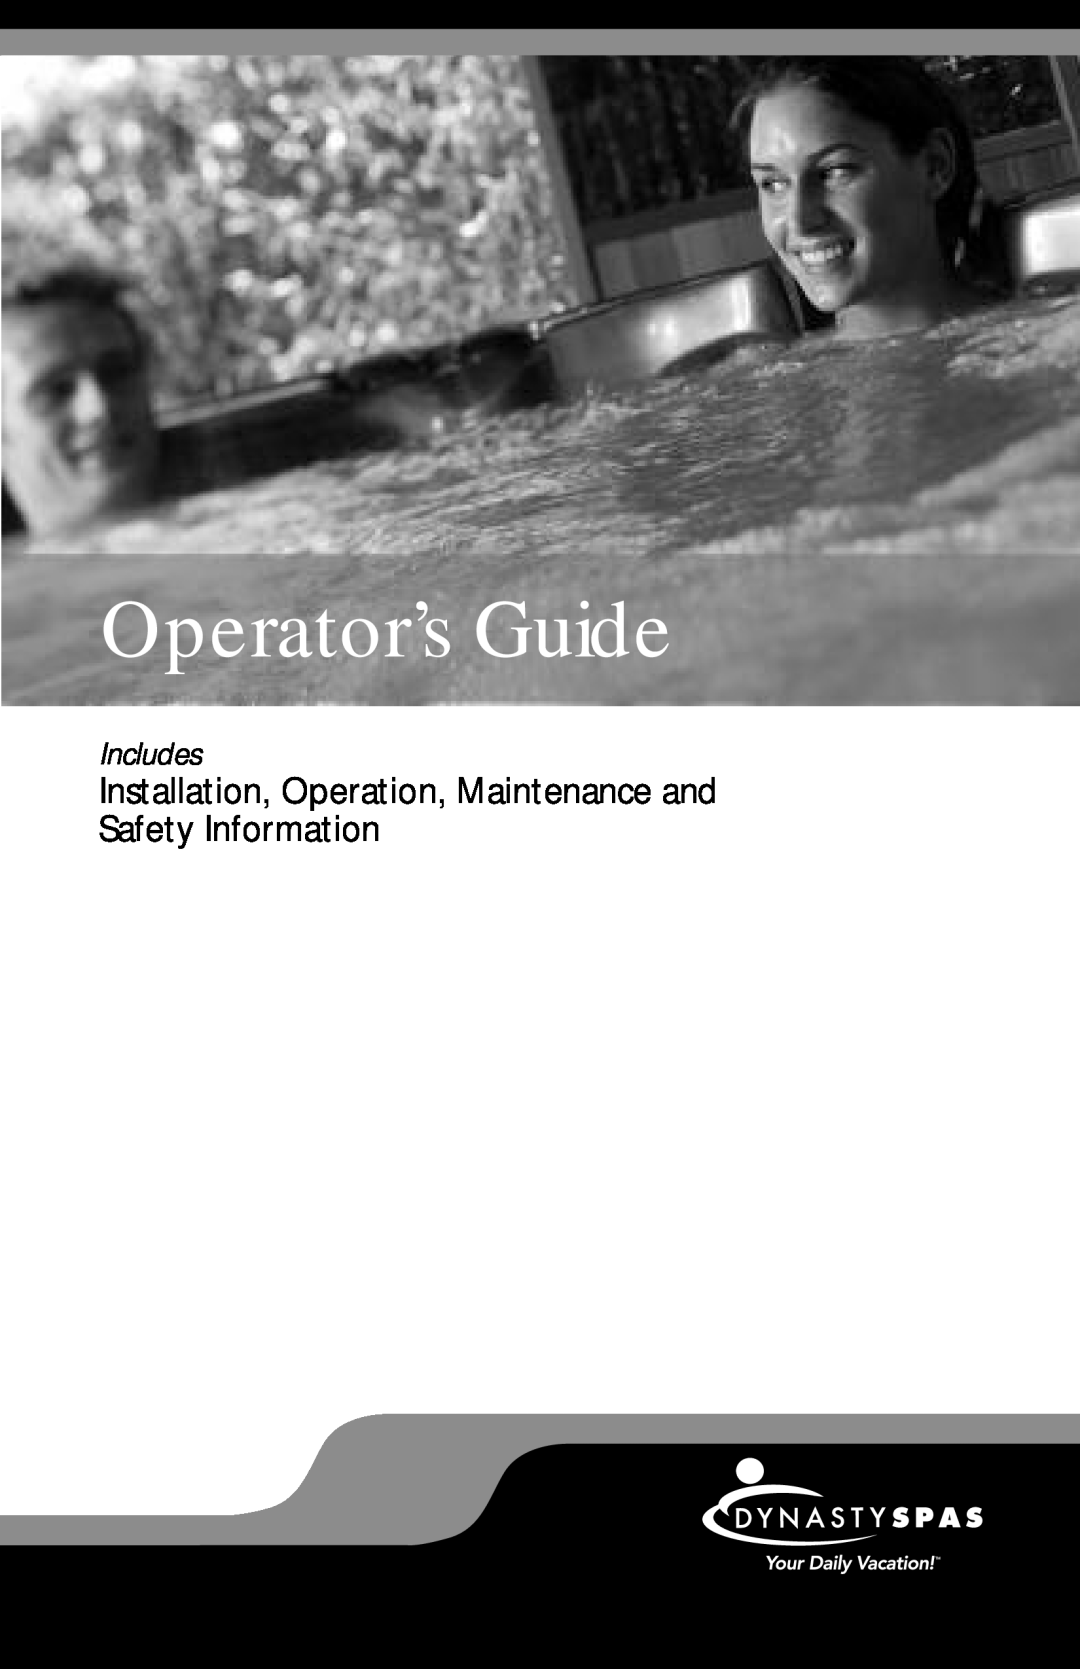 Dynasty Spas 2007 manual Operator’s Guide, Includes 